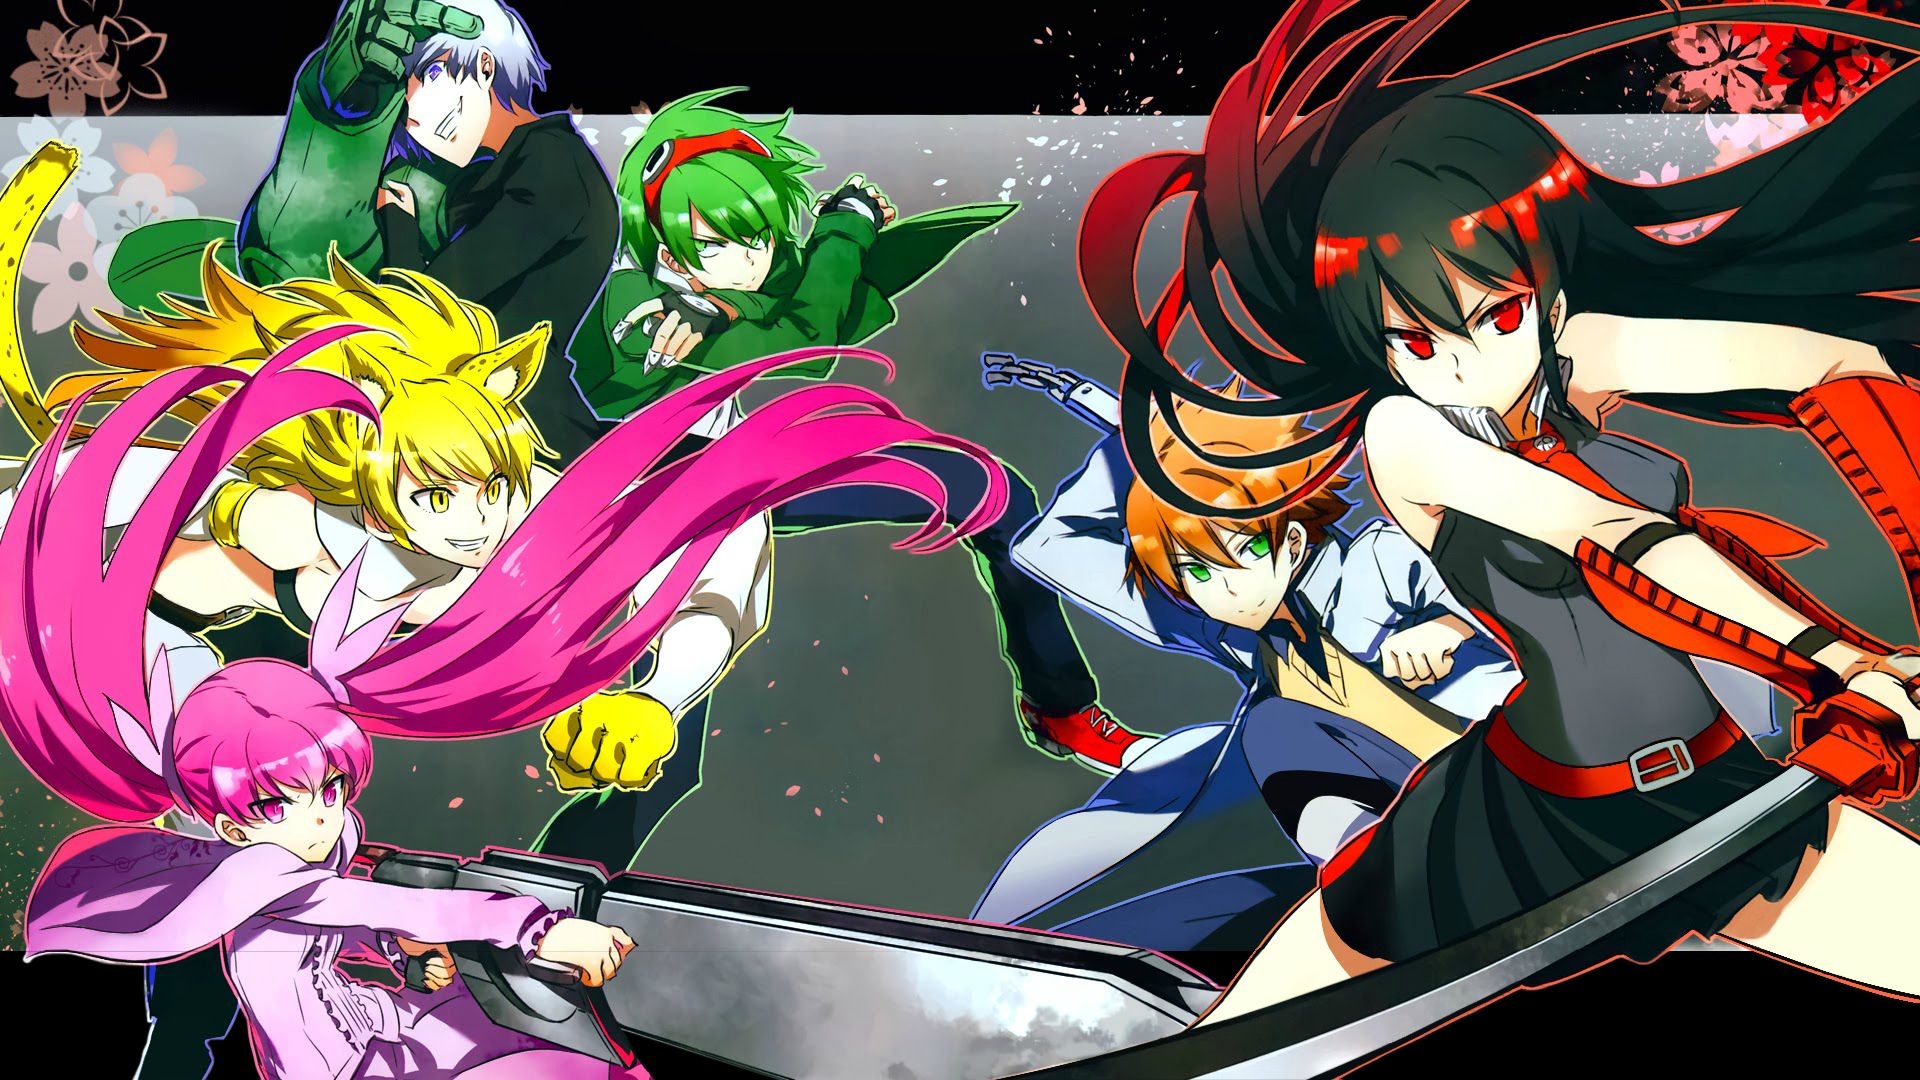 Akame Ga Kill! Wallpapers, Pictures, Images